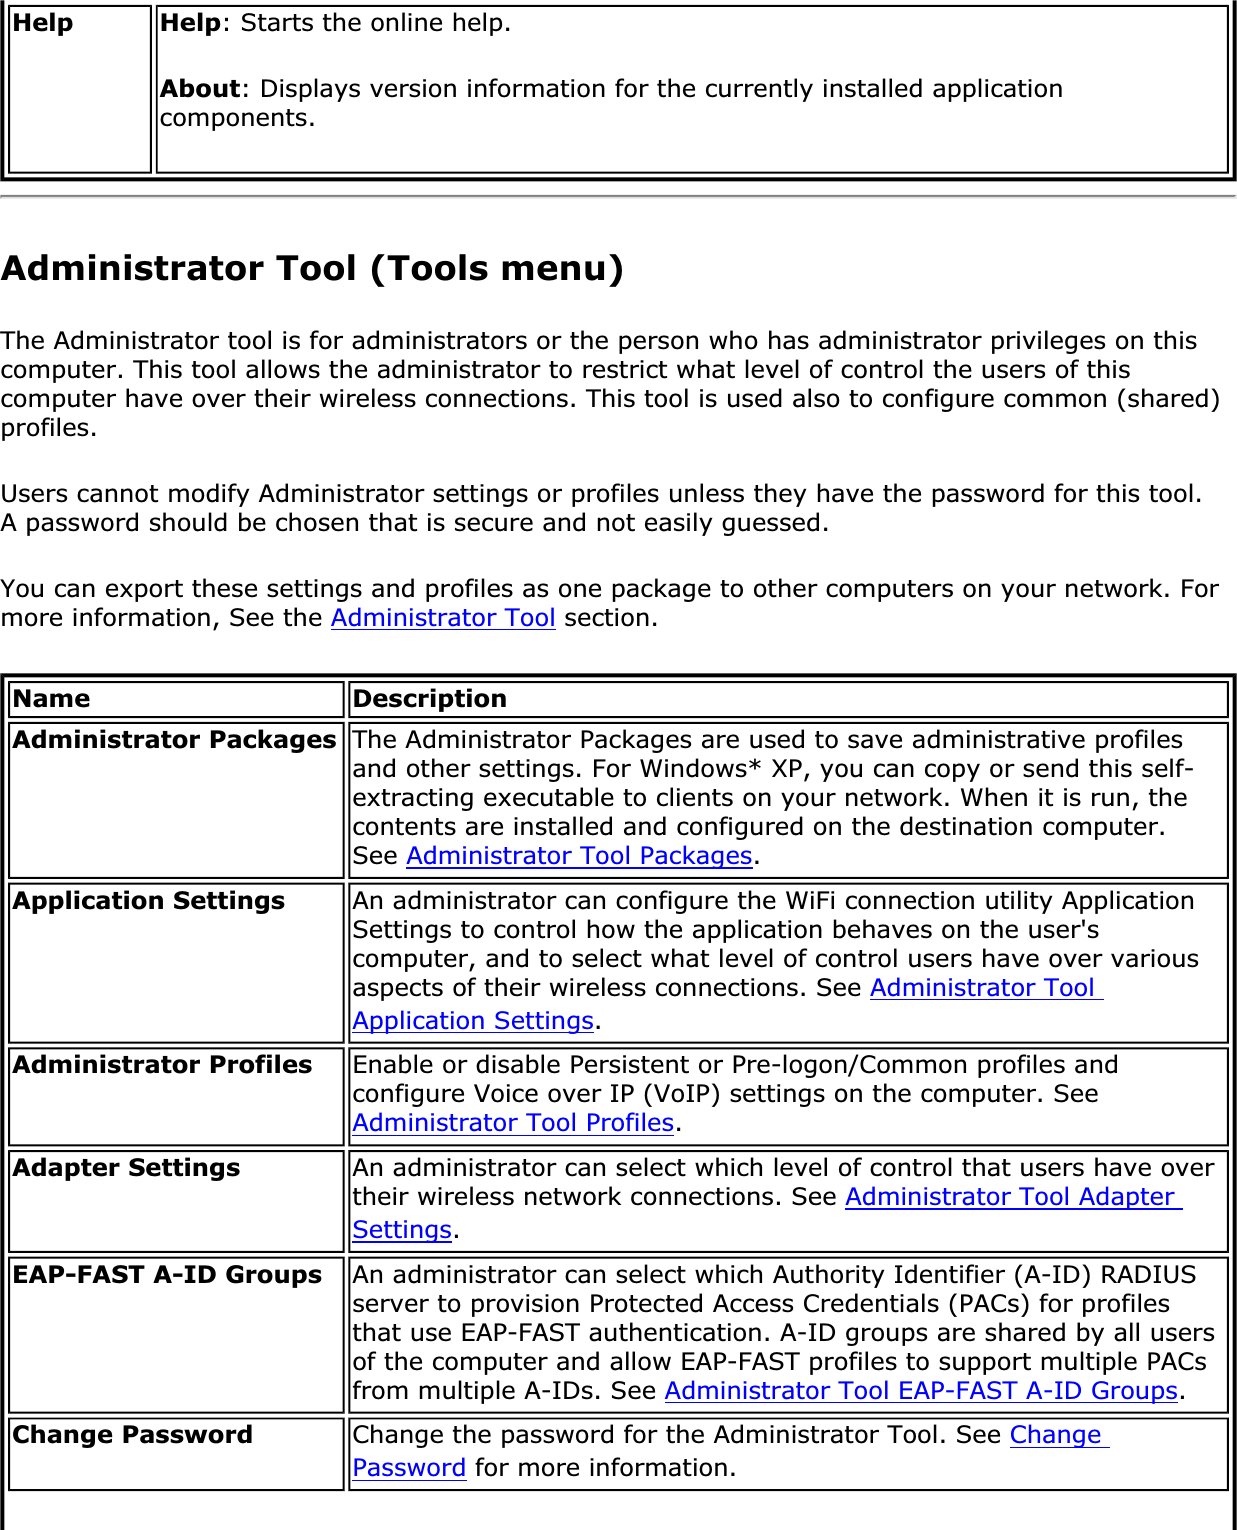 Help Help: Starts the online help.About: Displays version information for the currently installed application components.Administrator Tool (Tools menu)The Administrator tool is for administrators or the person who has administrator privileges on this computer. This tool allows the administrator to restrict what level of control the users of this computer have over their wireless connections. This tool is used also to configure common (shared) profiles.Users cannot modify Administrator settings or profiles unless they have the password for this tool. A password should be chosen that is secure and not easily guessed.You can export these settings and profiles as one package to other computers on your network. For more information, See the Administrator Tool section.Name DescriptionAdministrator Packages The Administrator Packages are used to save administrative profiles and other settings. For Windows* XP, you can copy or send this self-extracting executable to clients on your network. When it is run, the contents are installed and configured on the destination computer. See Administrator Tool Packages.Application Settings An administrator can configure the WiFi connection utility Application Settings to control how the application behaves on the user&apos;s computer, and to select what level of control users have over various aspects of their wireless connections. See Administrator Tool Application Settings.Administrator Profiles Enable or disable Persistent or Pre-logon/Common profiles and configure Voice over IP (VoIP) settings on the computer. See Administrator Tool Profiles.Adapter Settings An administrator can select which level of control that users have over their wireless network connections. See Administrator Tool Adapter Settings.EAP-FAST A-ID Groups An administrator can select which Authority Identifier (A-ID) RADIUS server to provision Protected Access Credentials (PACs) for profiles that use EAP-FAST authentication. A-ID groups are shared by all users of the computer and allow EAP-FAST profiles to support multiple PACs from multiple A-IDs. See Administrator Tool EAP-FAST A-ID Groups.Change Password Change the password for the Administrator Tool. See ChangePassword for more information.